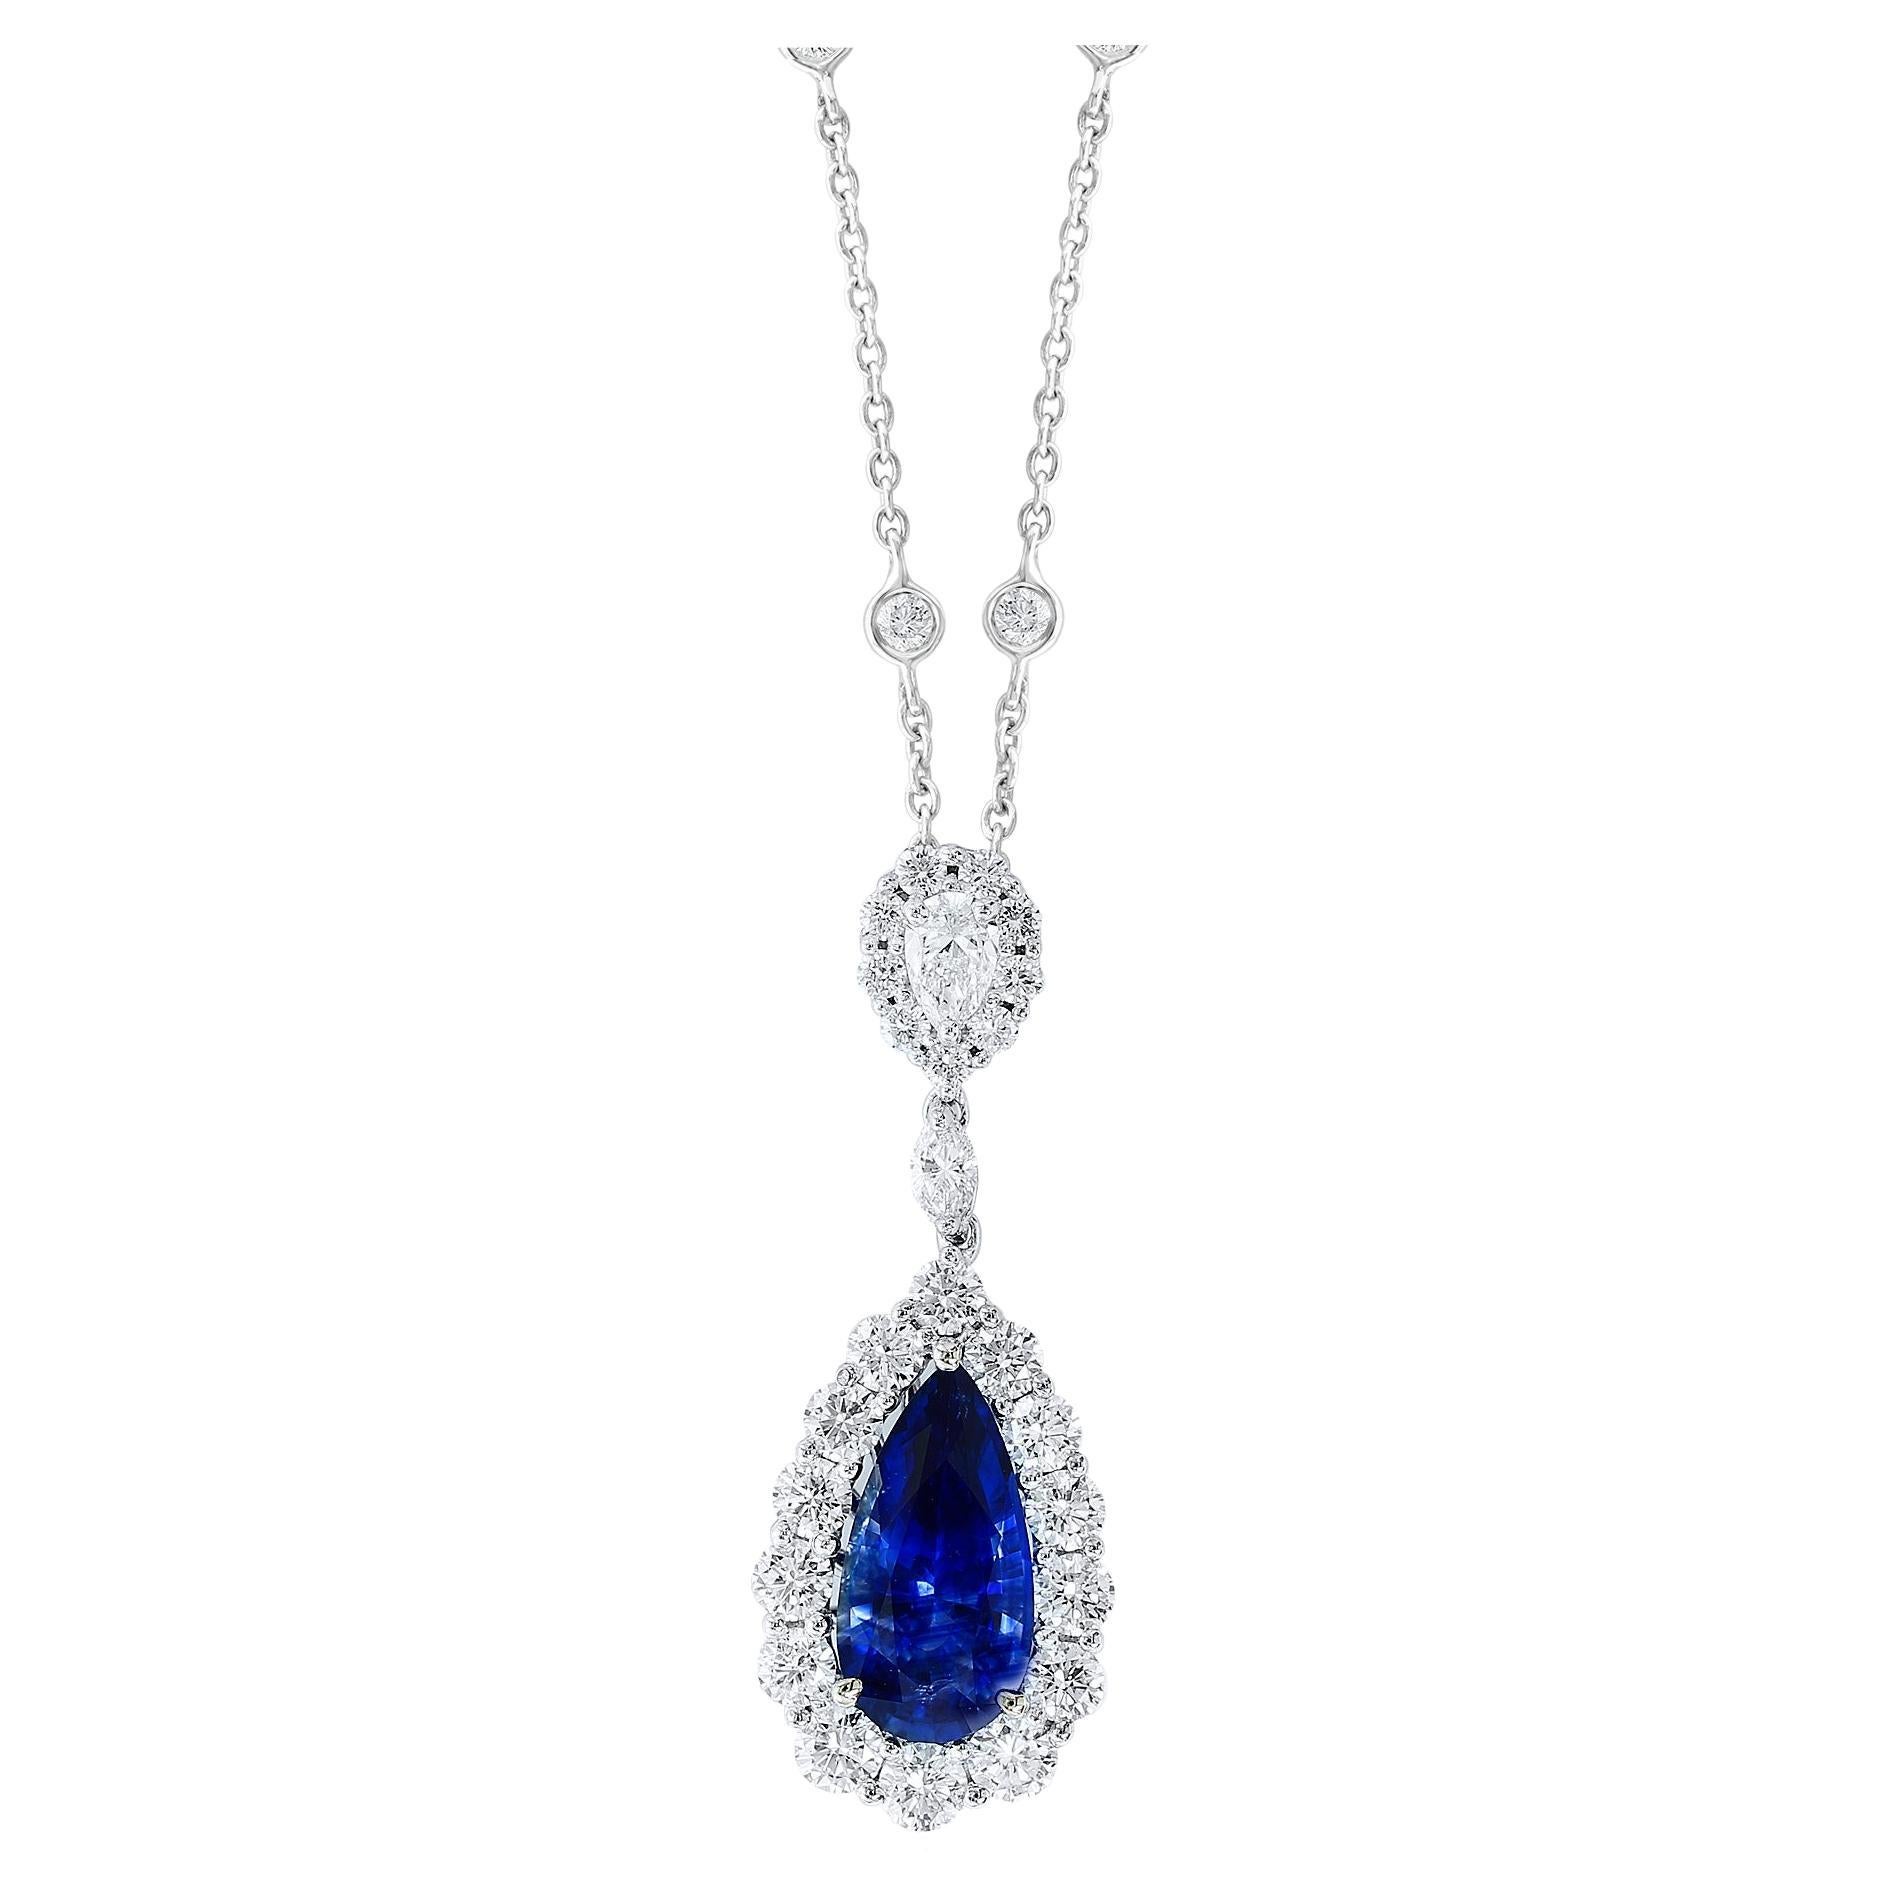 4.35 Carat Pear shape Sapphire and Diamond Drop Necklace in 18K White Gold For Sale